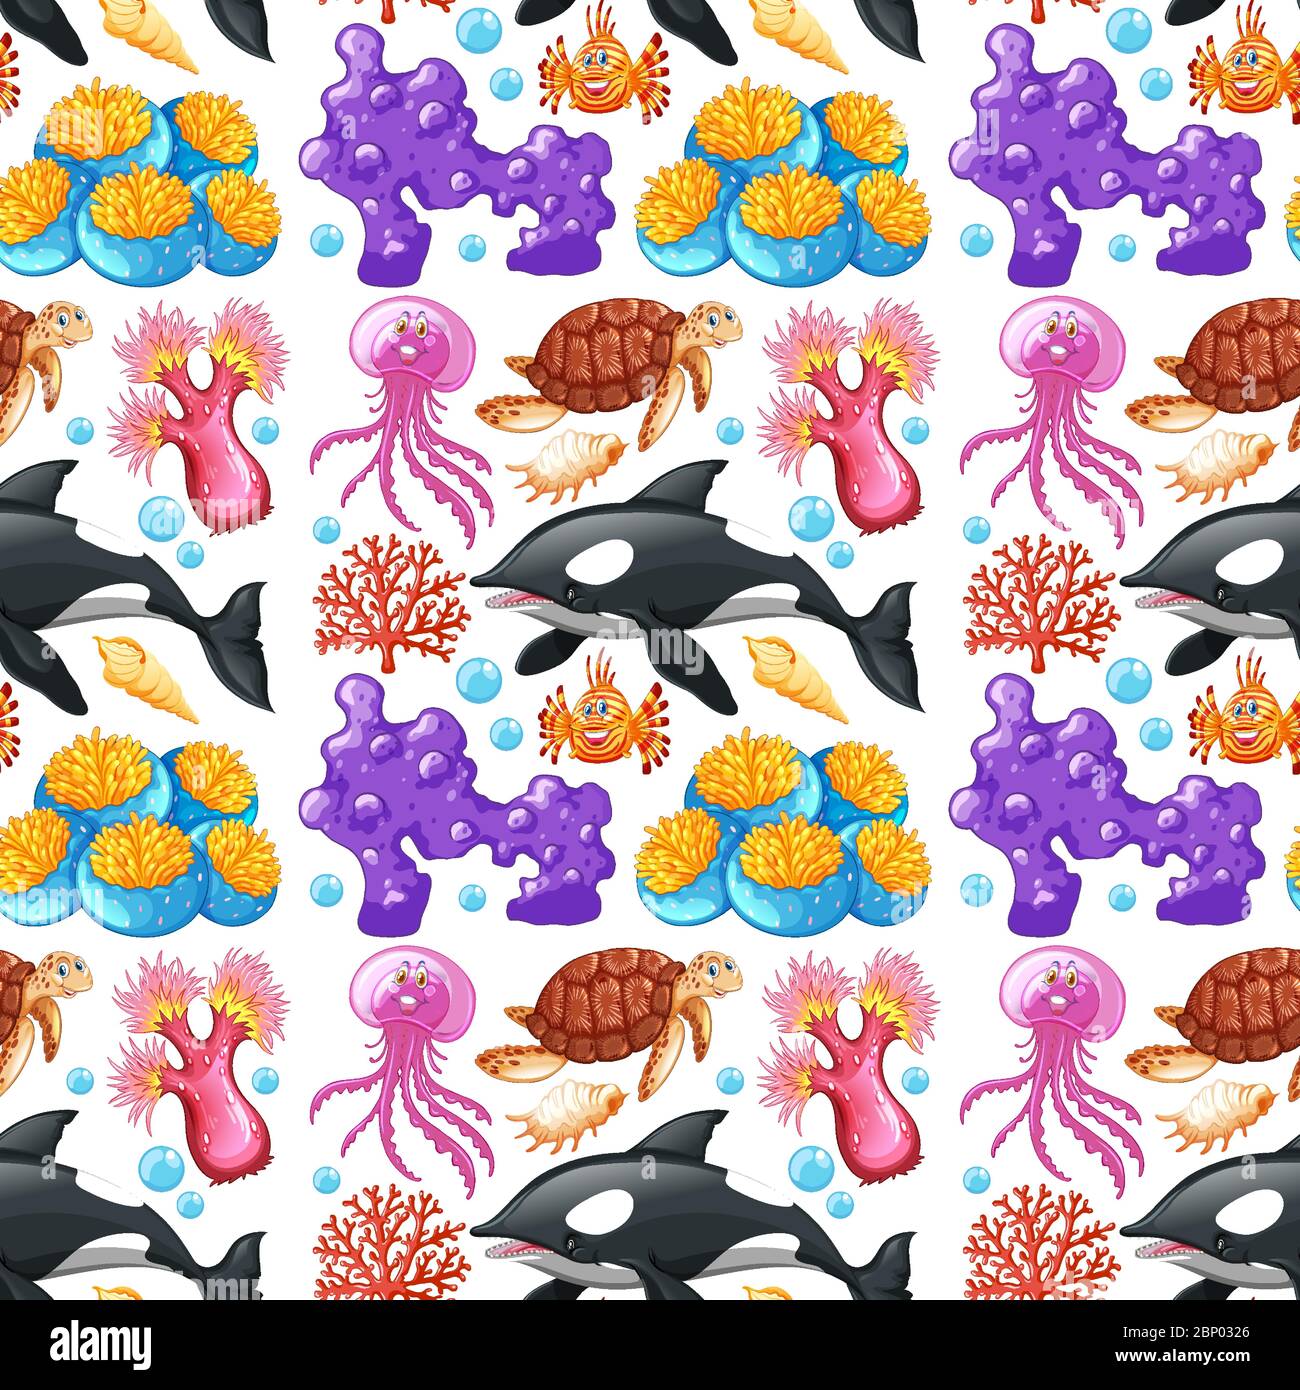 Seamless background design with sea creatures and coral illustration Stock Vector